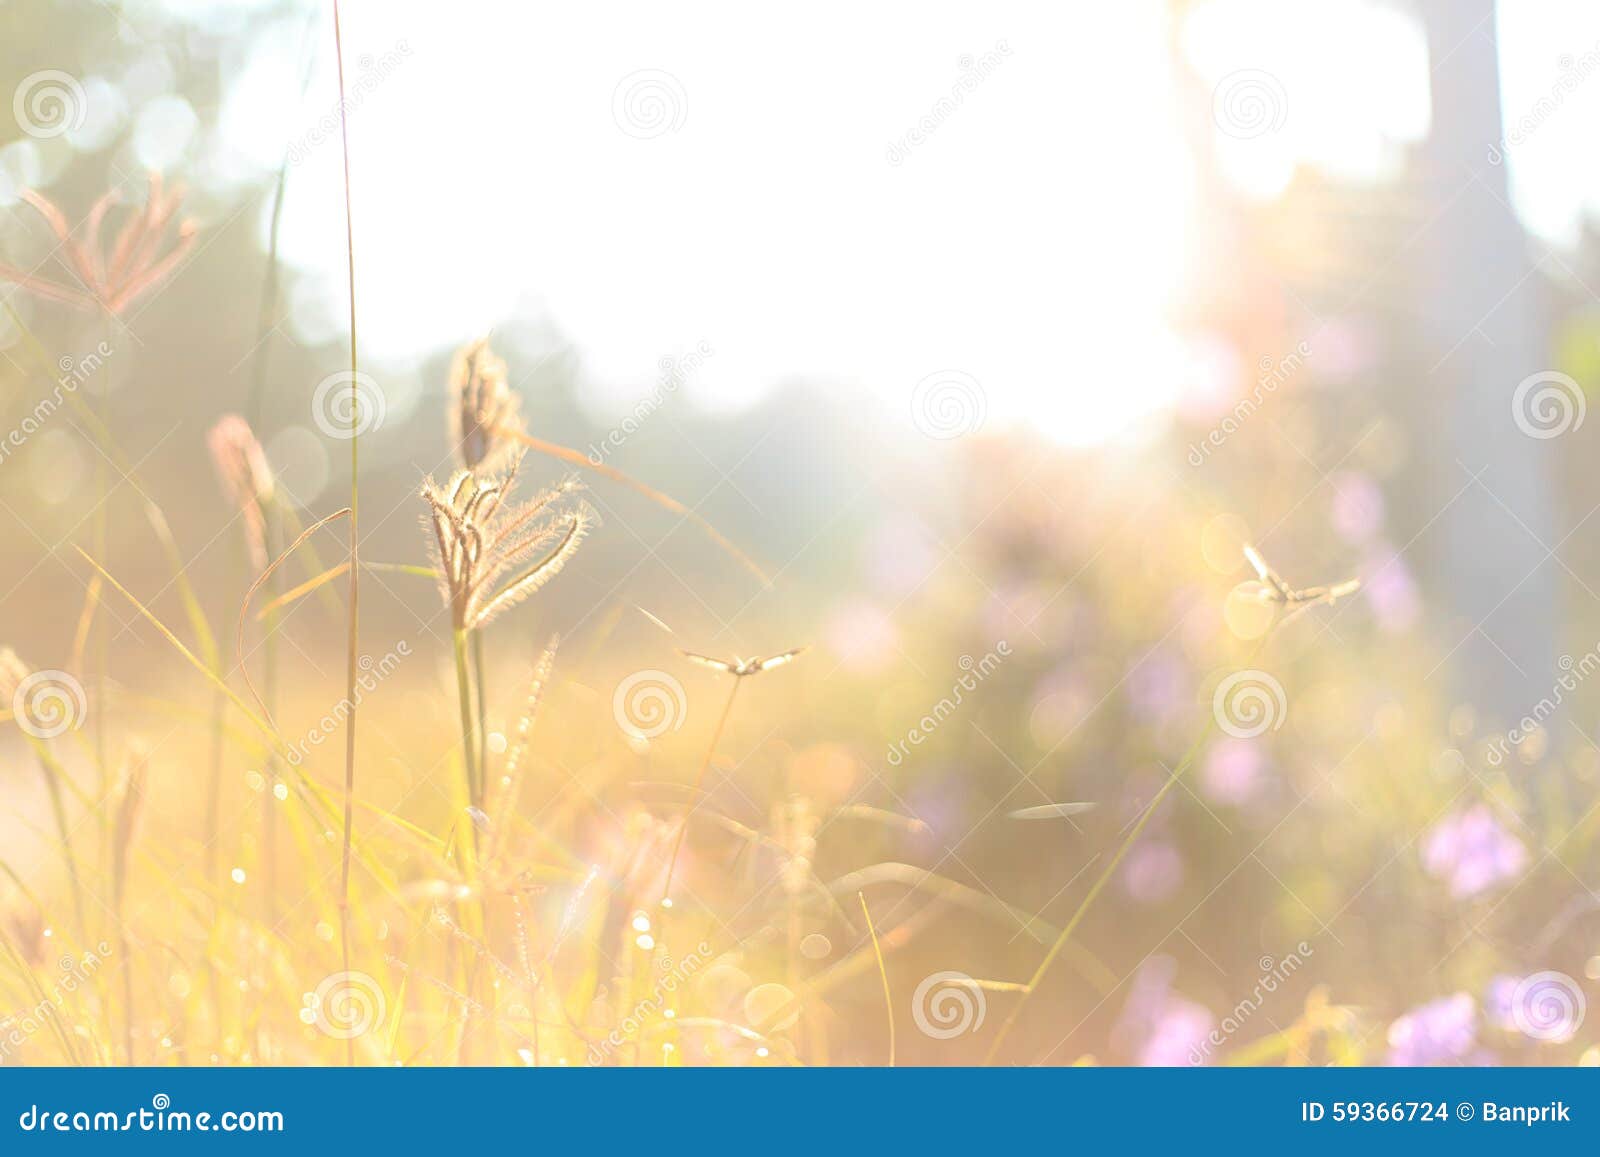 Morning Landscape- Grass and Sunlight Stock Photo - Image of beautiful